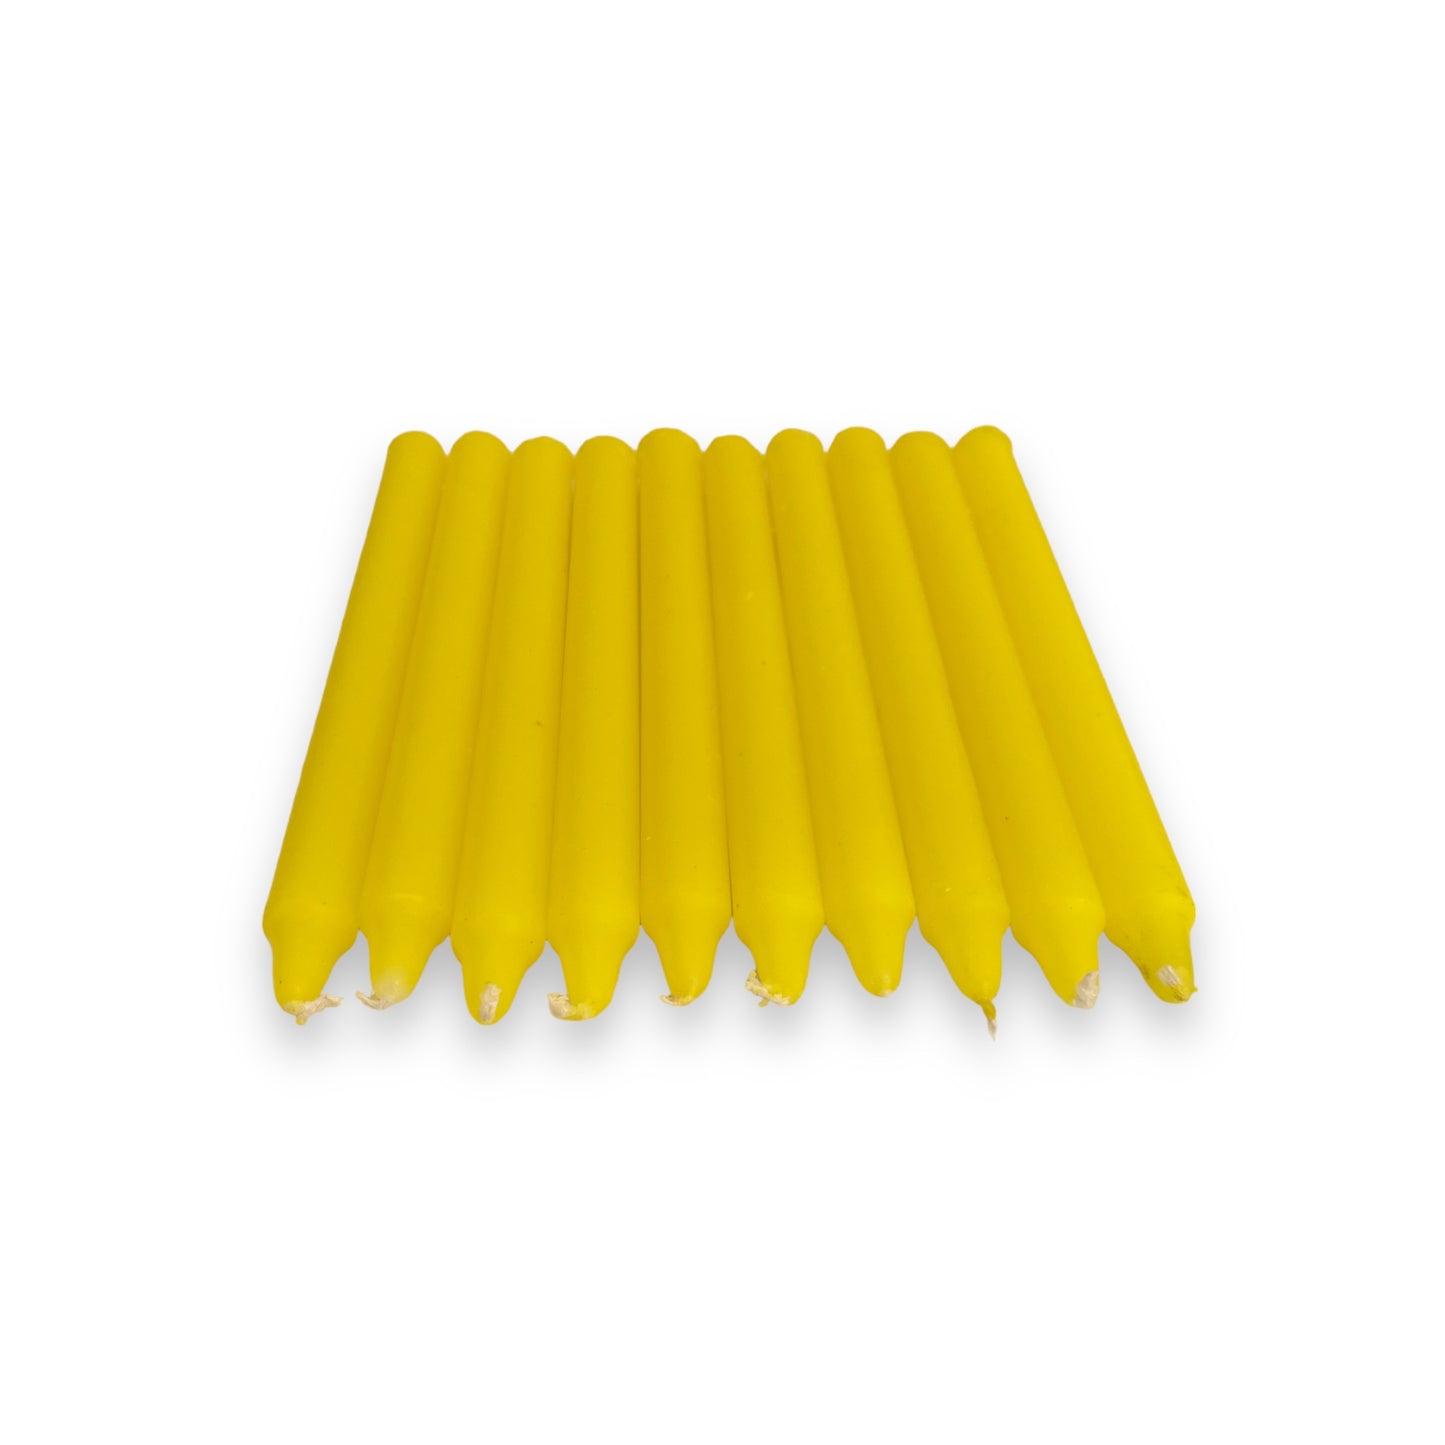 Pack of 10 Yellow Candles - 17cm